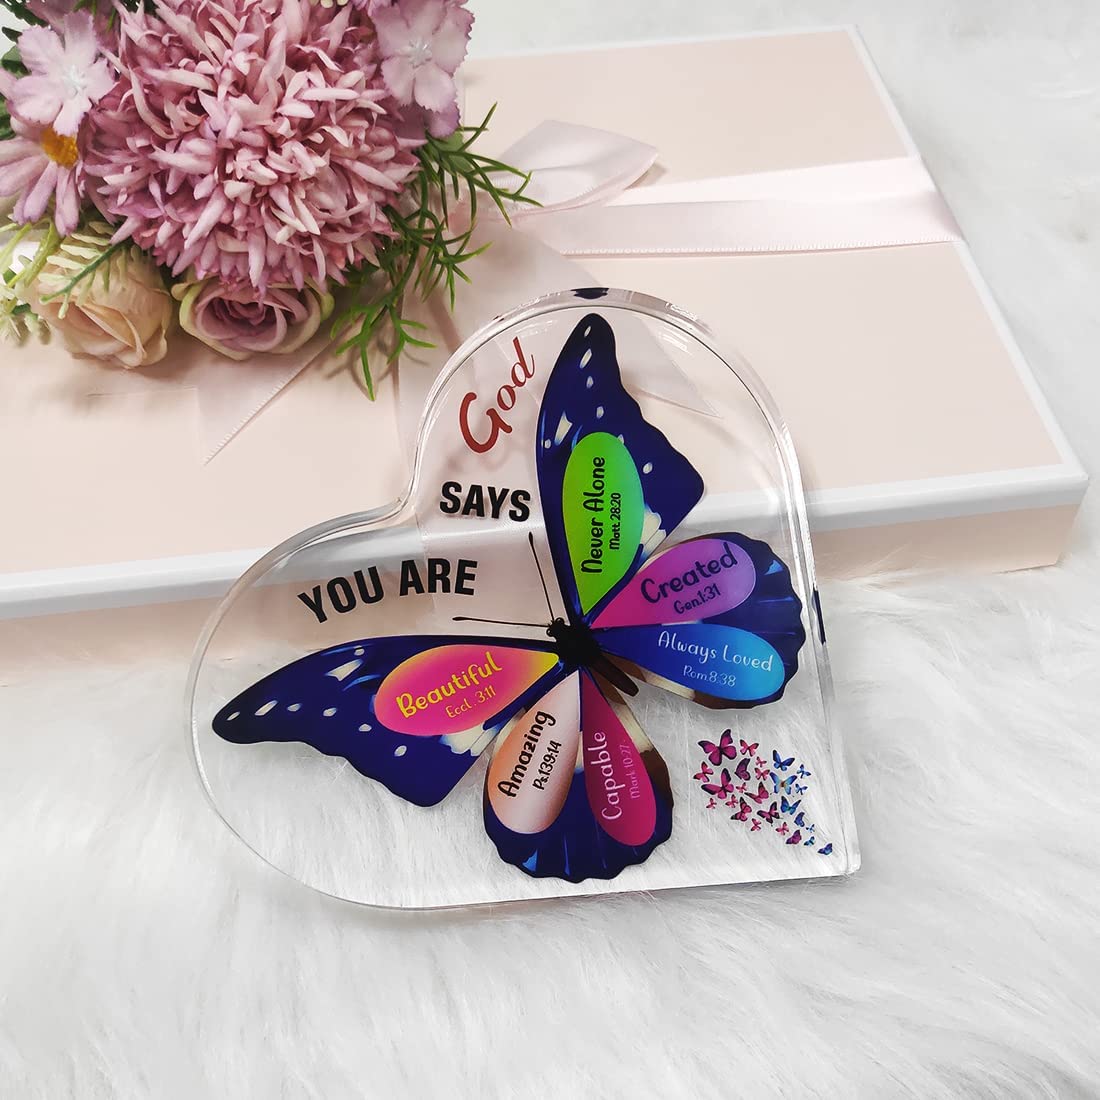 Gifts for Women, Inspirational Faith Gifts for Women Religious, Bible Verse and Encouragement Butterfly Desk Decor, Gifts for Women, Mom, Friend, Sister-Acrylic Hearts Plaques